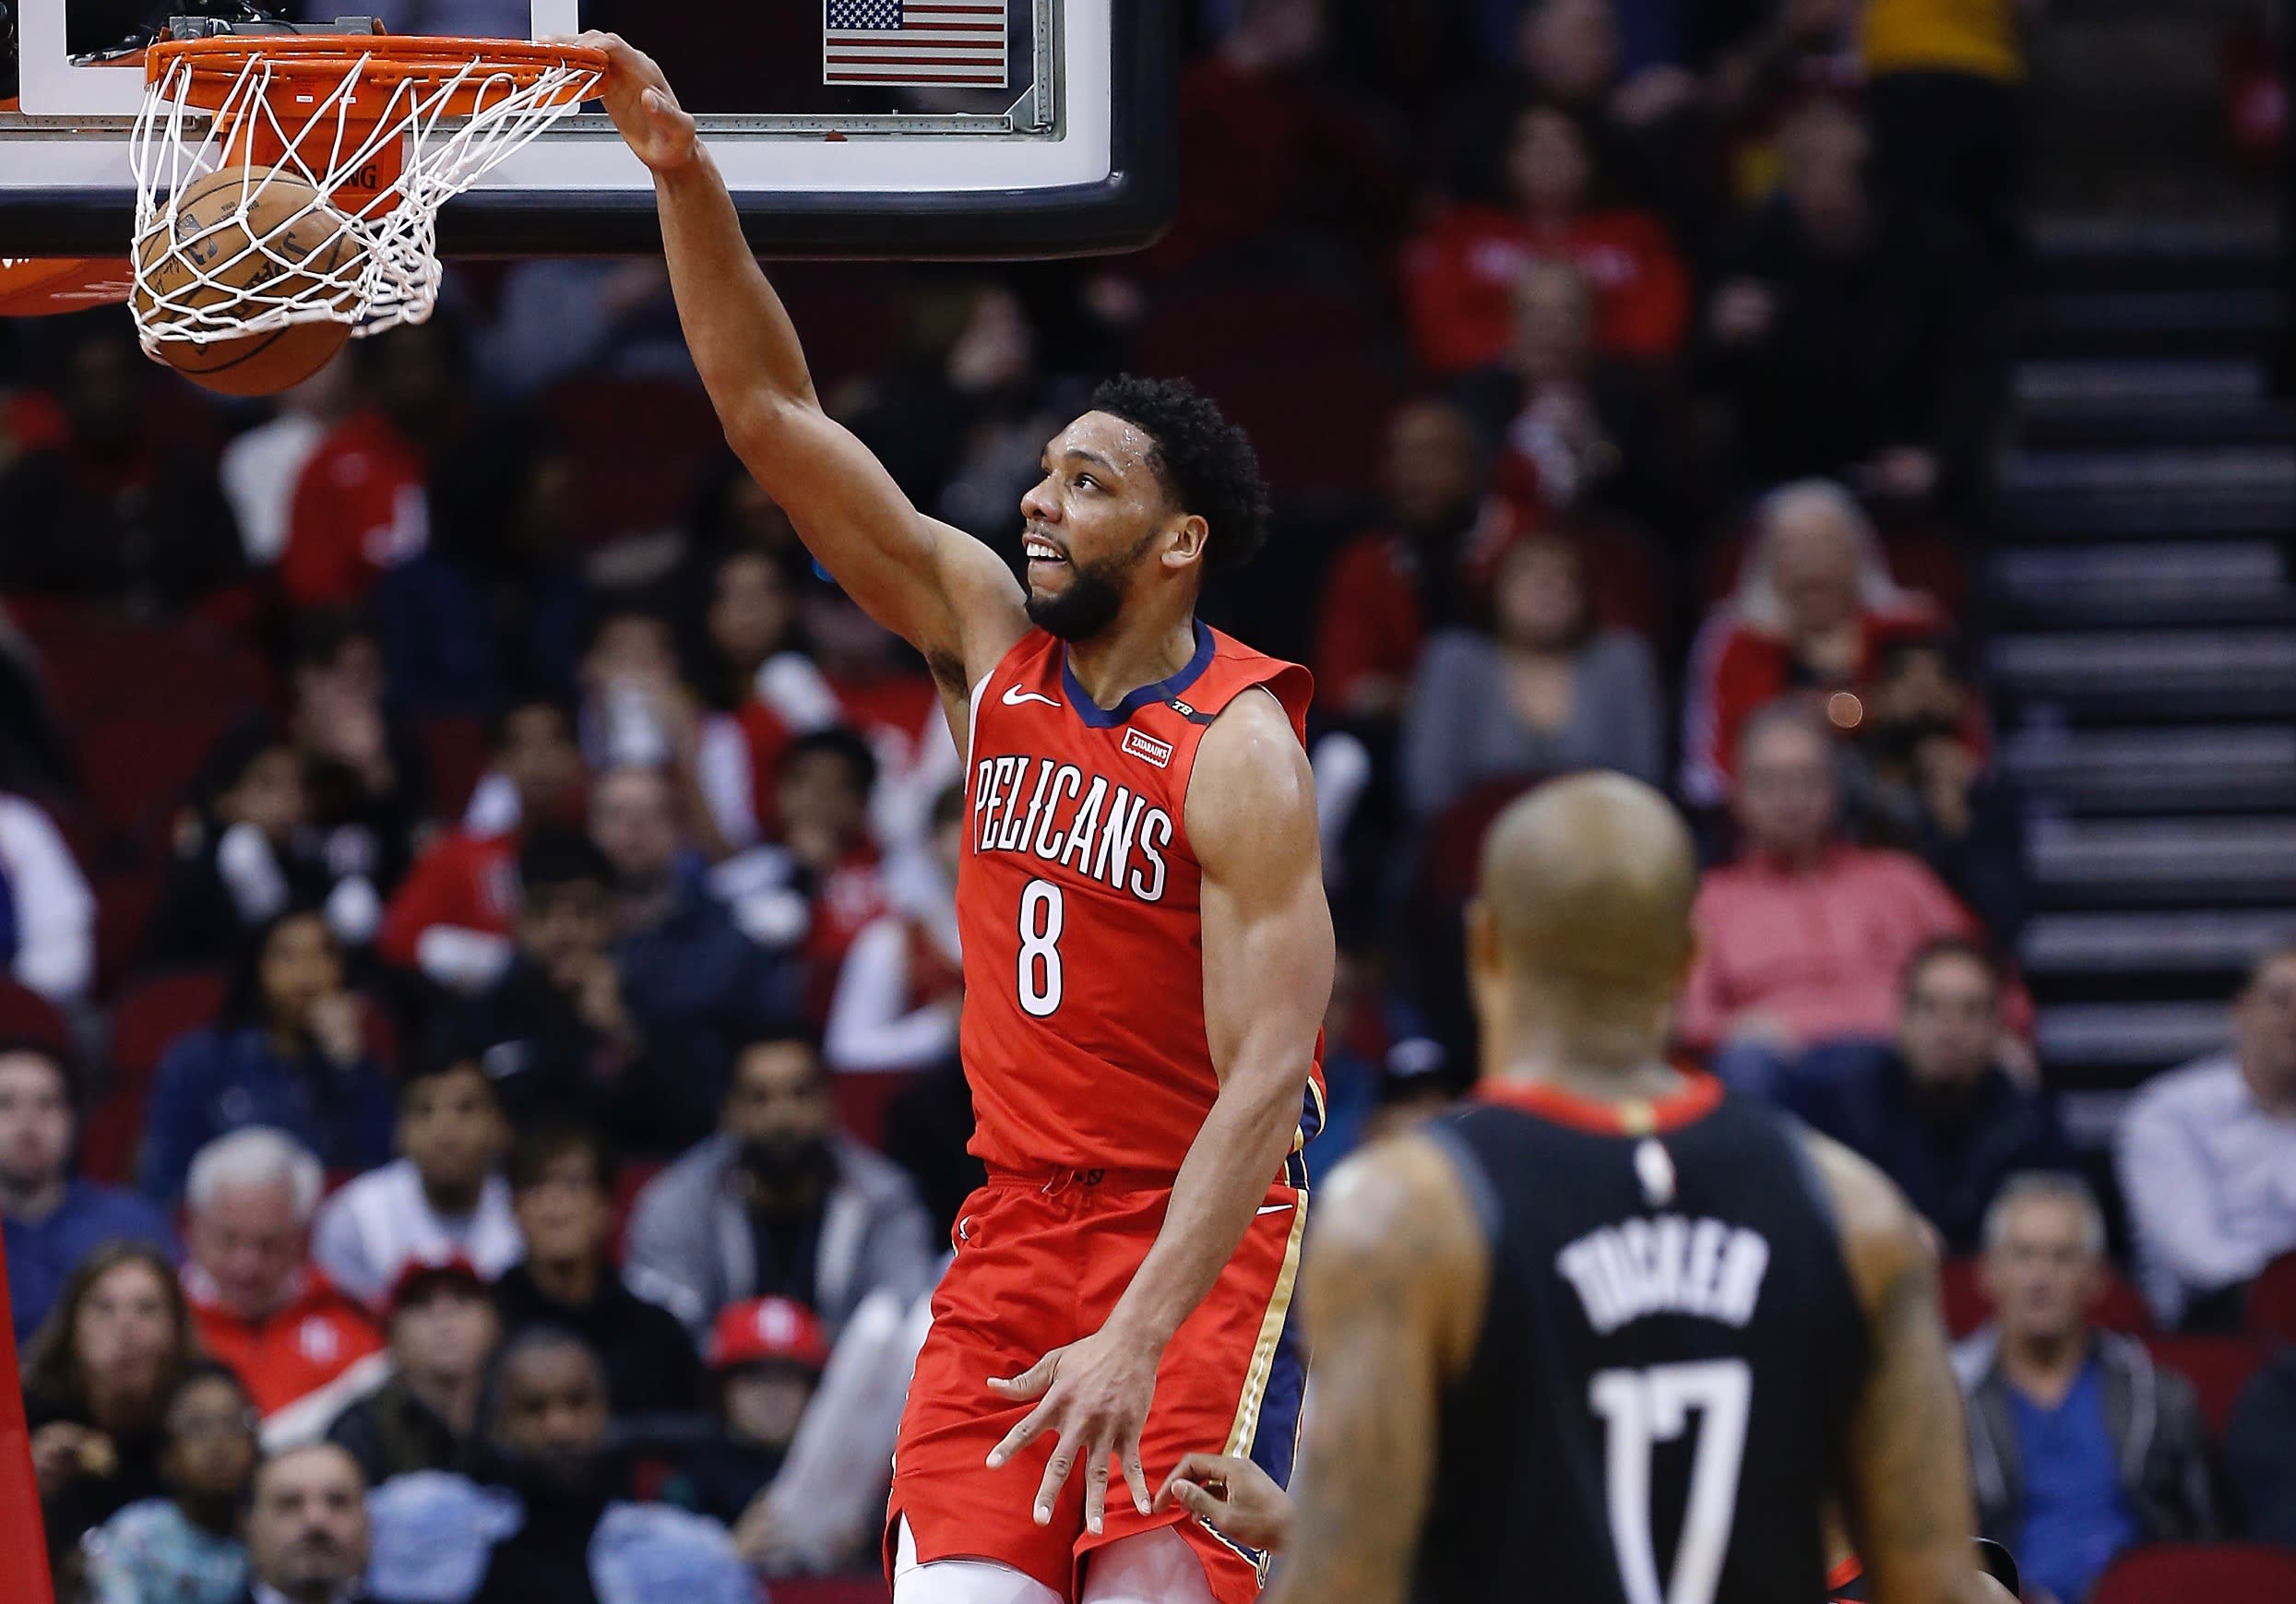 Jahlil Okafor thriving in Anthony Davis' absence